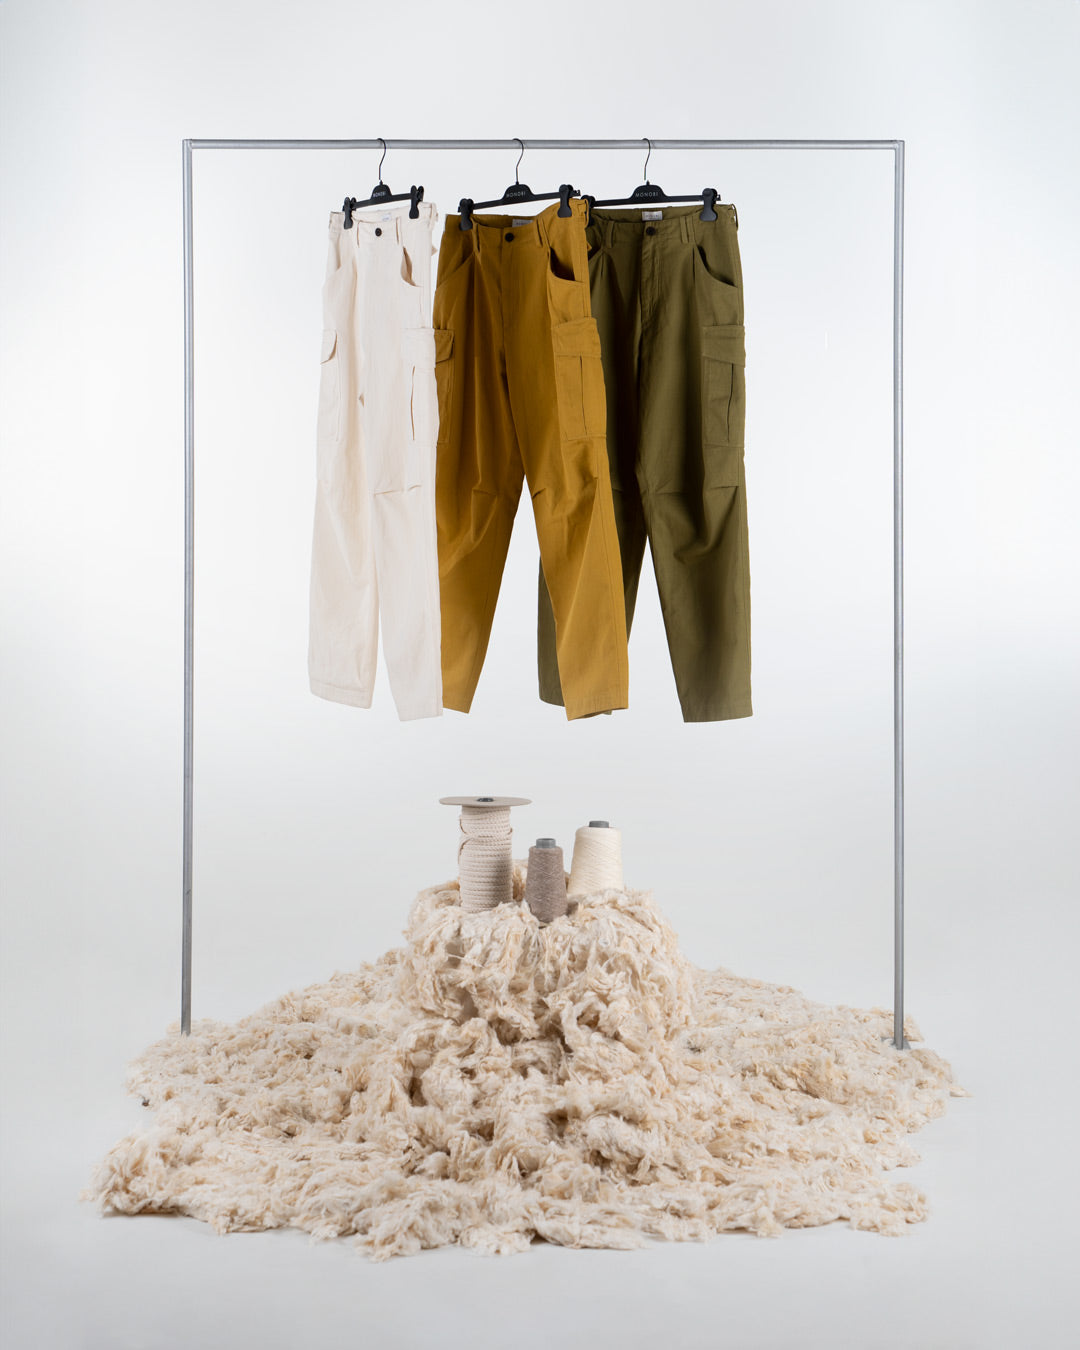 Three pairs of hanging cargo pants in three different colours: ochre, frog green and natural